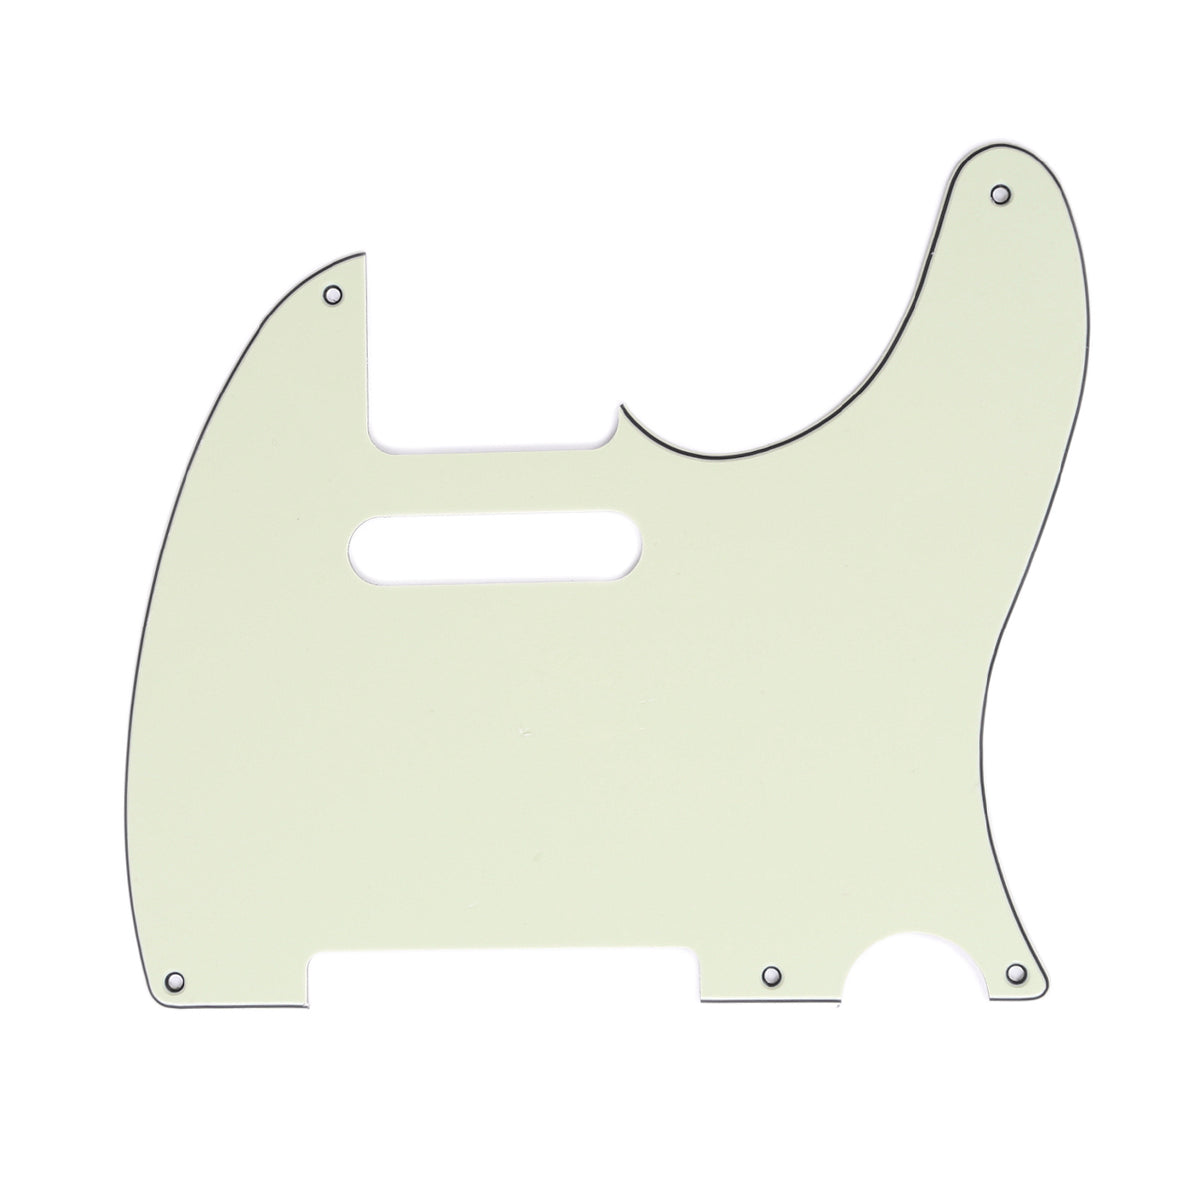 Musiclily 5 Hole Vintage Tele Pickguard for Fender American/Mexican Made Standard Telecaster Style Electric Guitar, 3Ply Mint Green